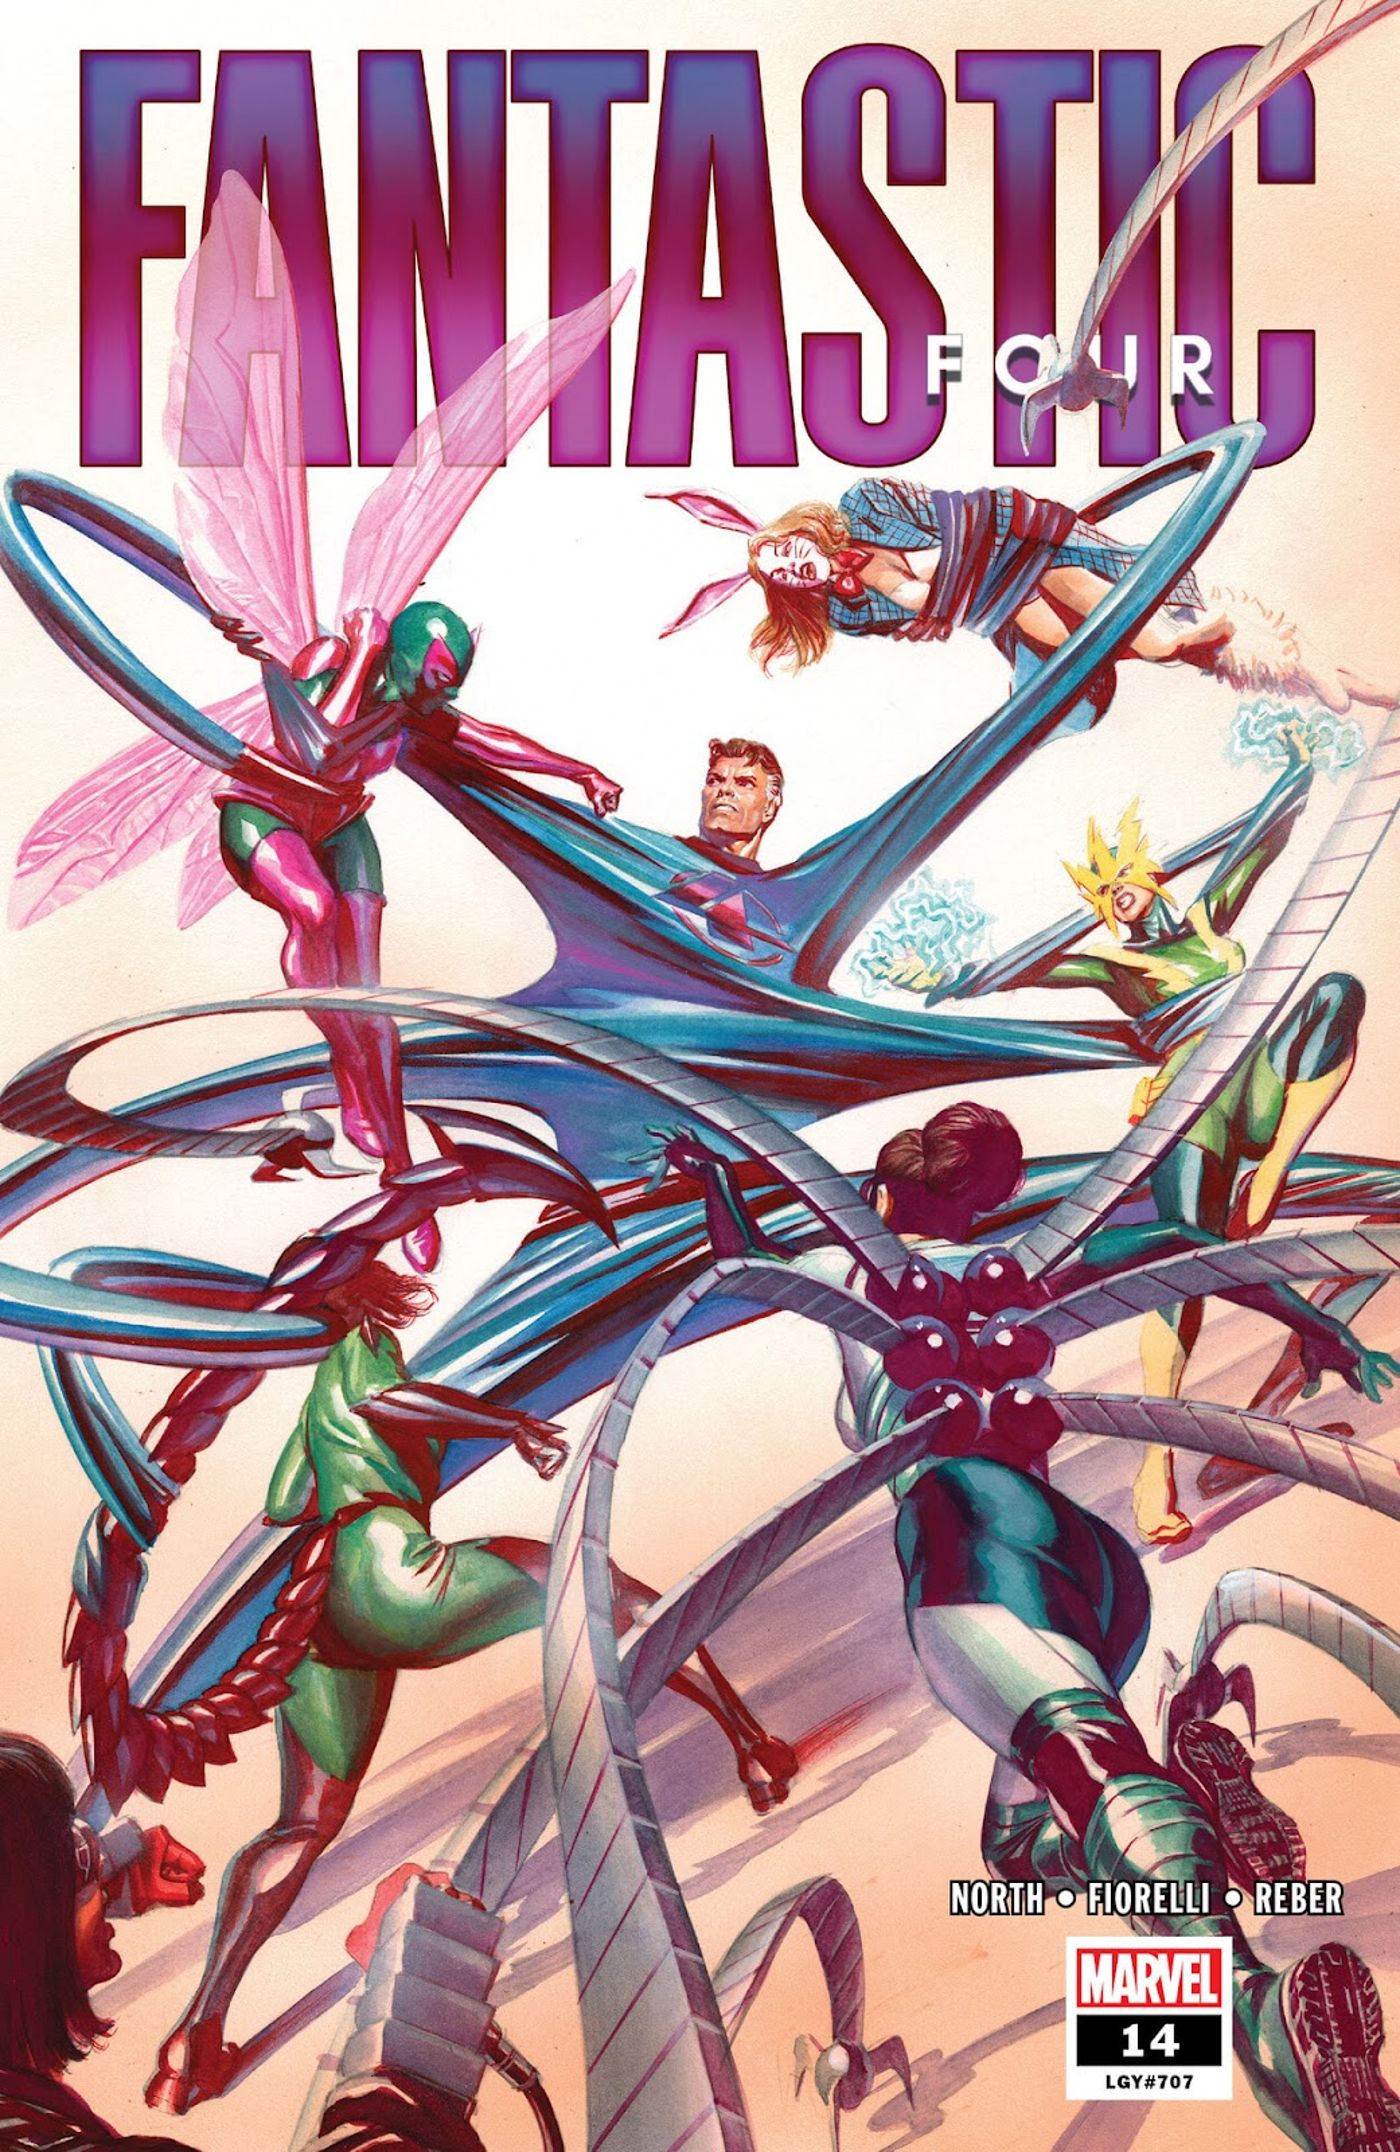 Mister Fantastic uses extra arms to fight Lady Octopus, Beetle, Trapstr, Scorpia, and Electro. 